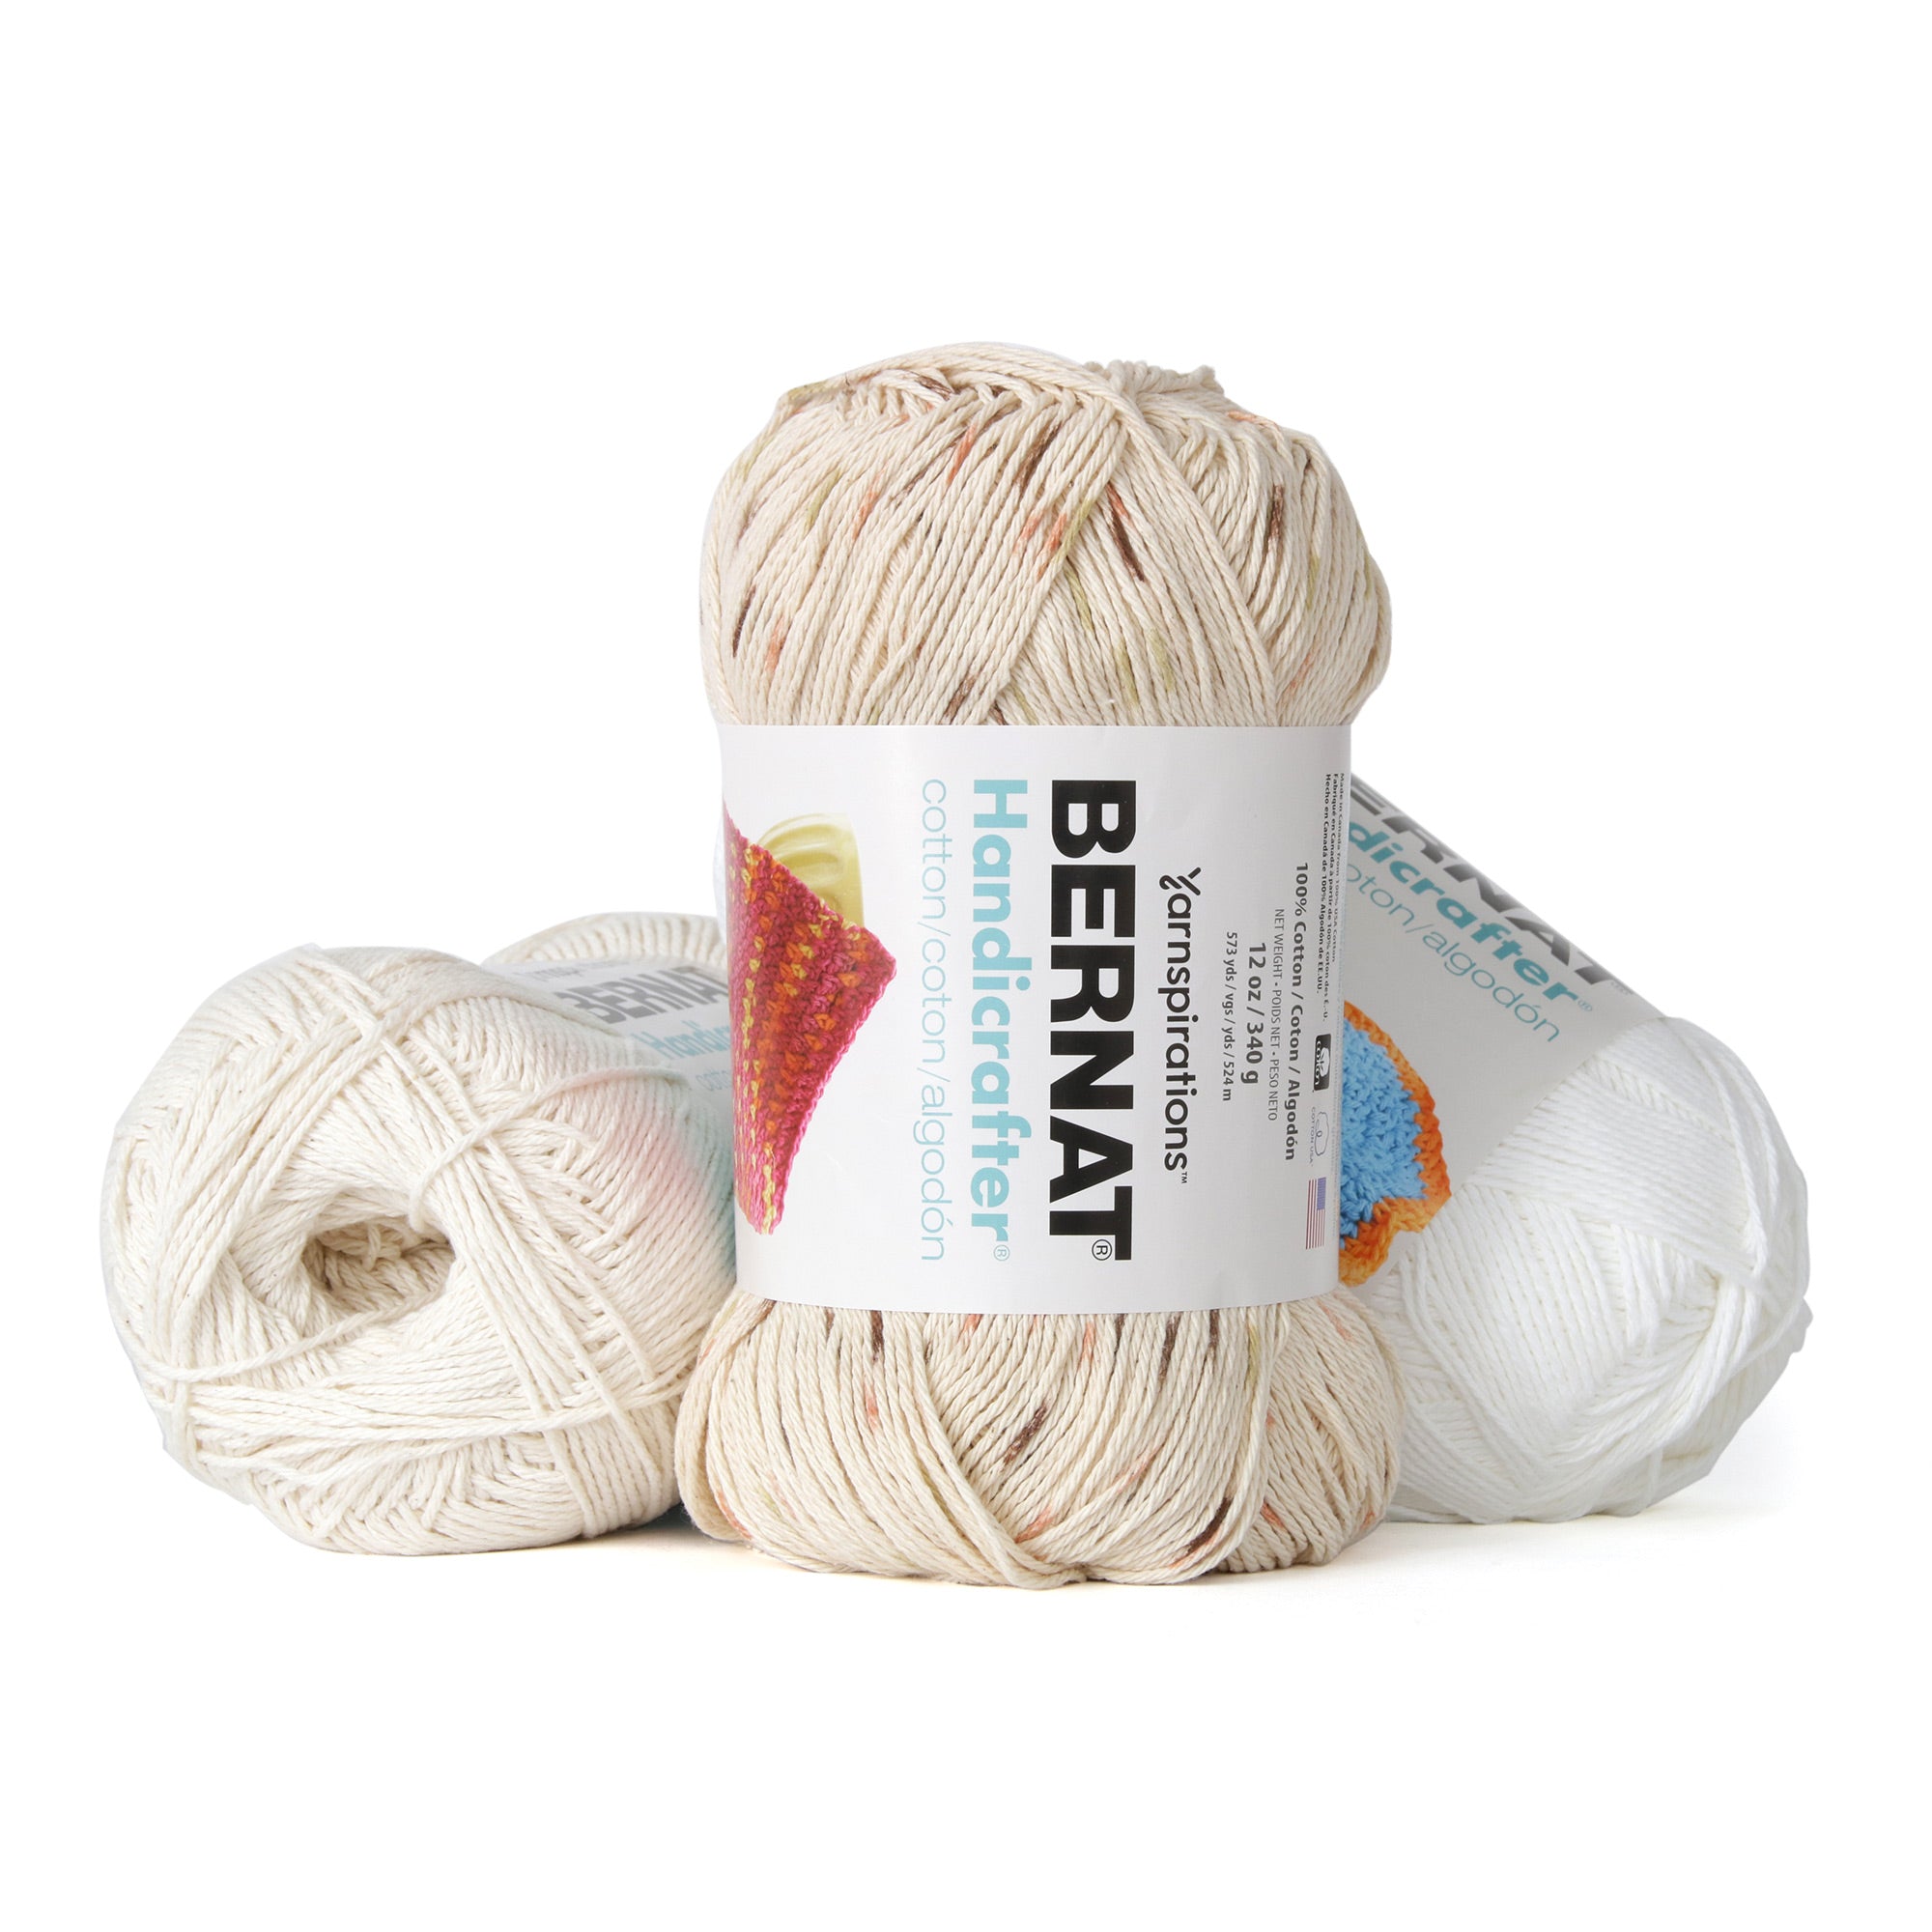 Handicrafter Cotton Yarn – Large - Off white